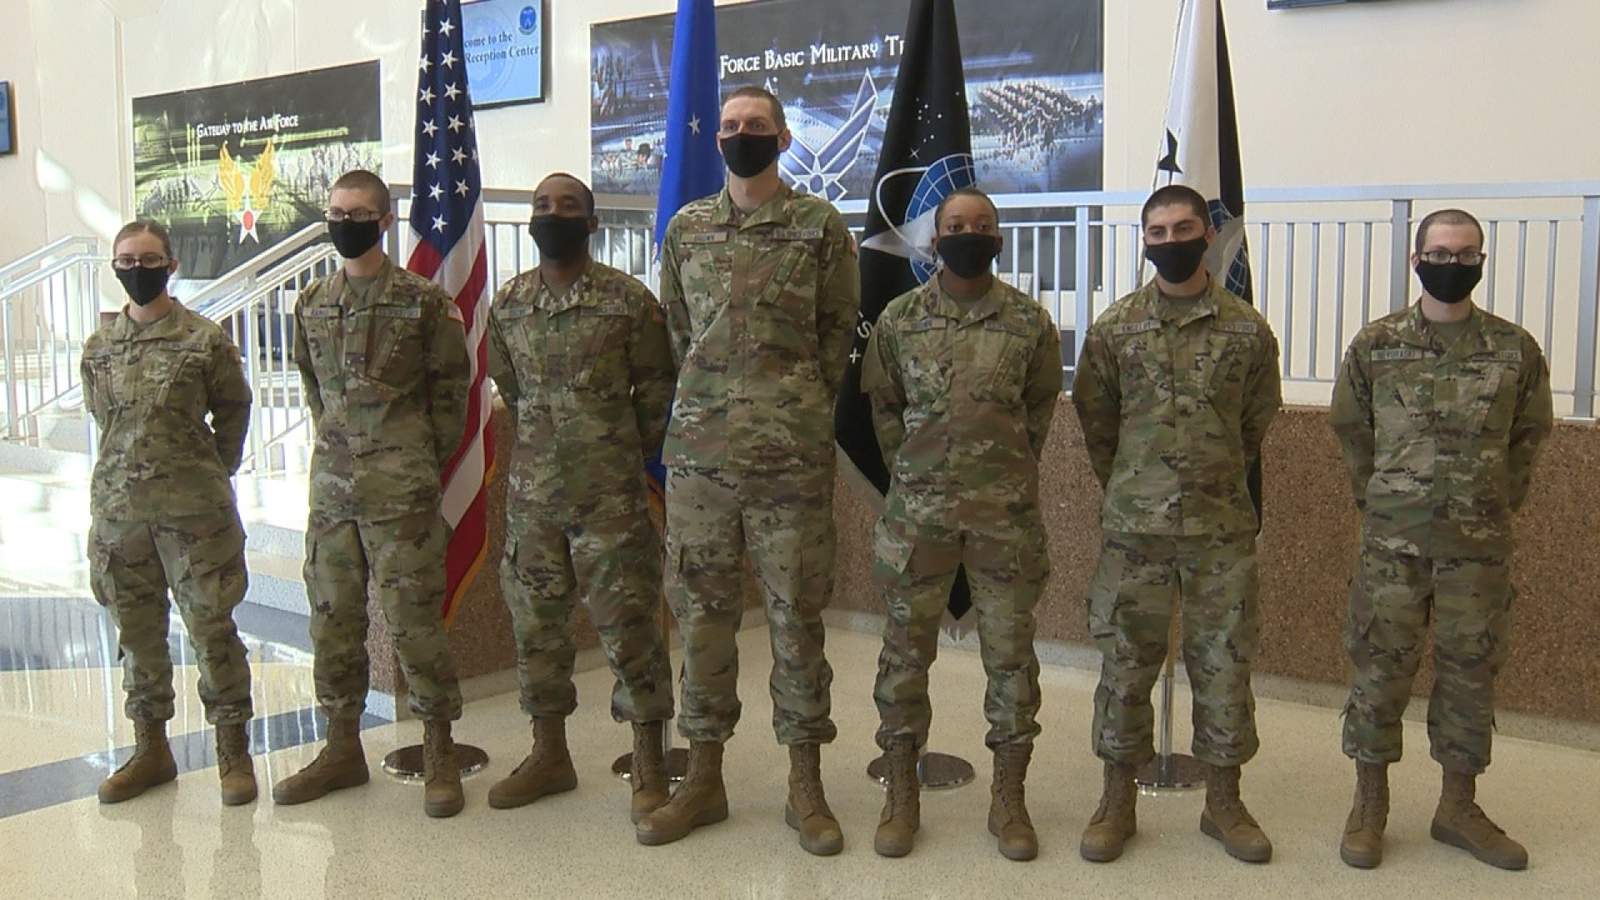 Seven Air Force basic trainees graduating at JBSA-Lackland to join US Space Force